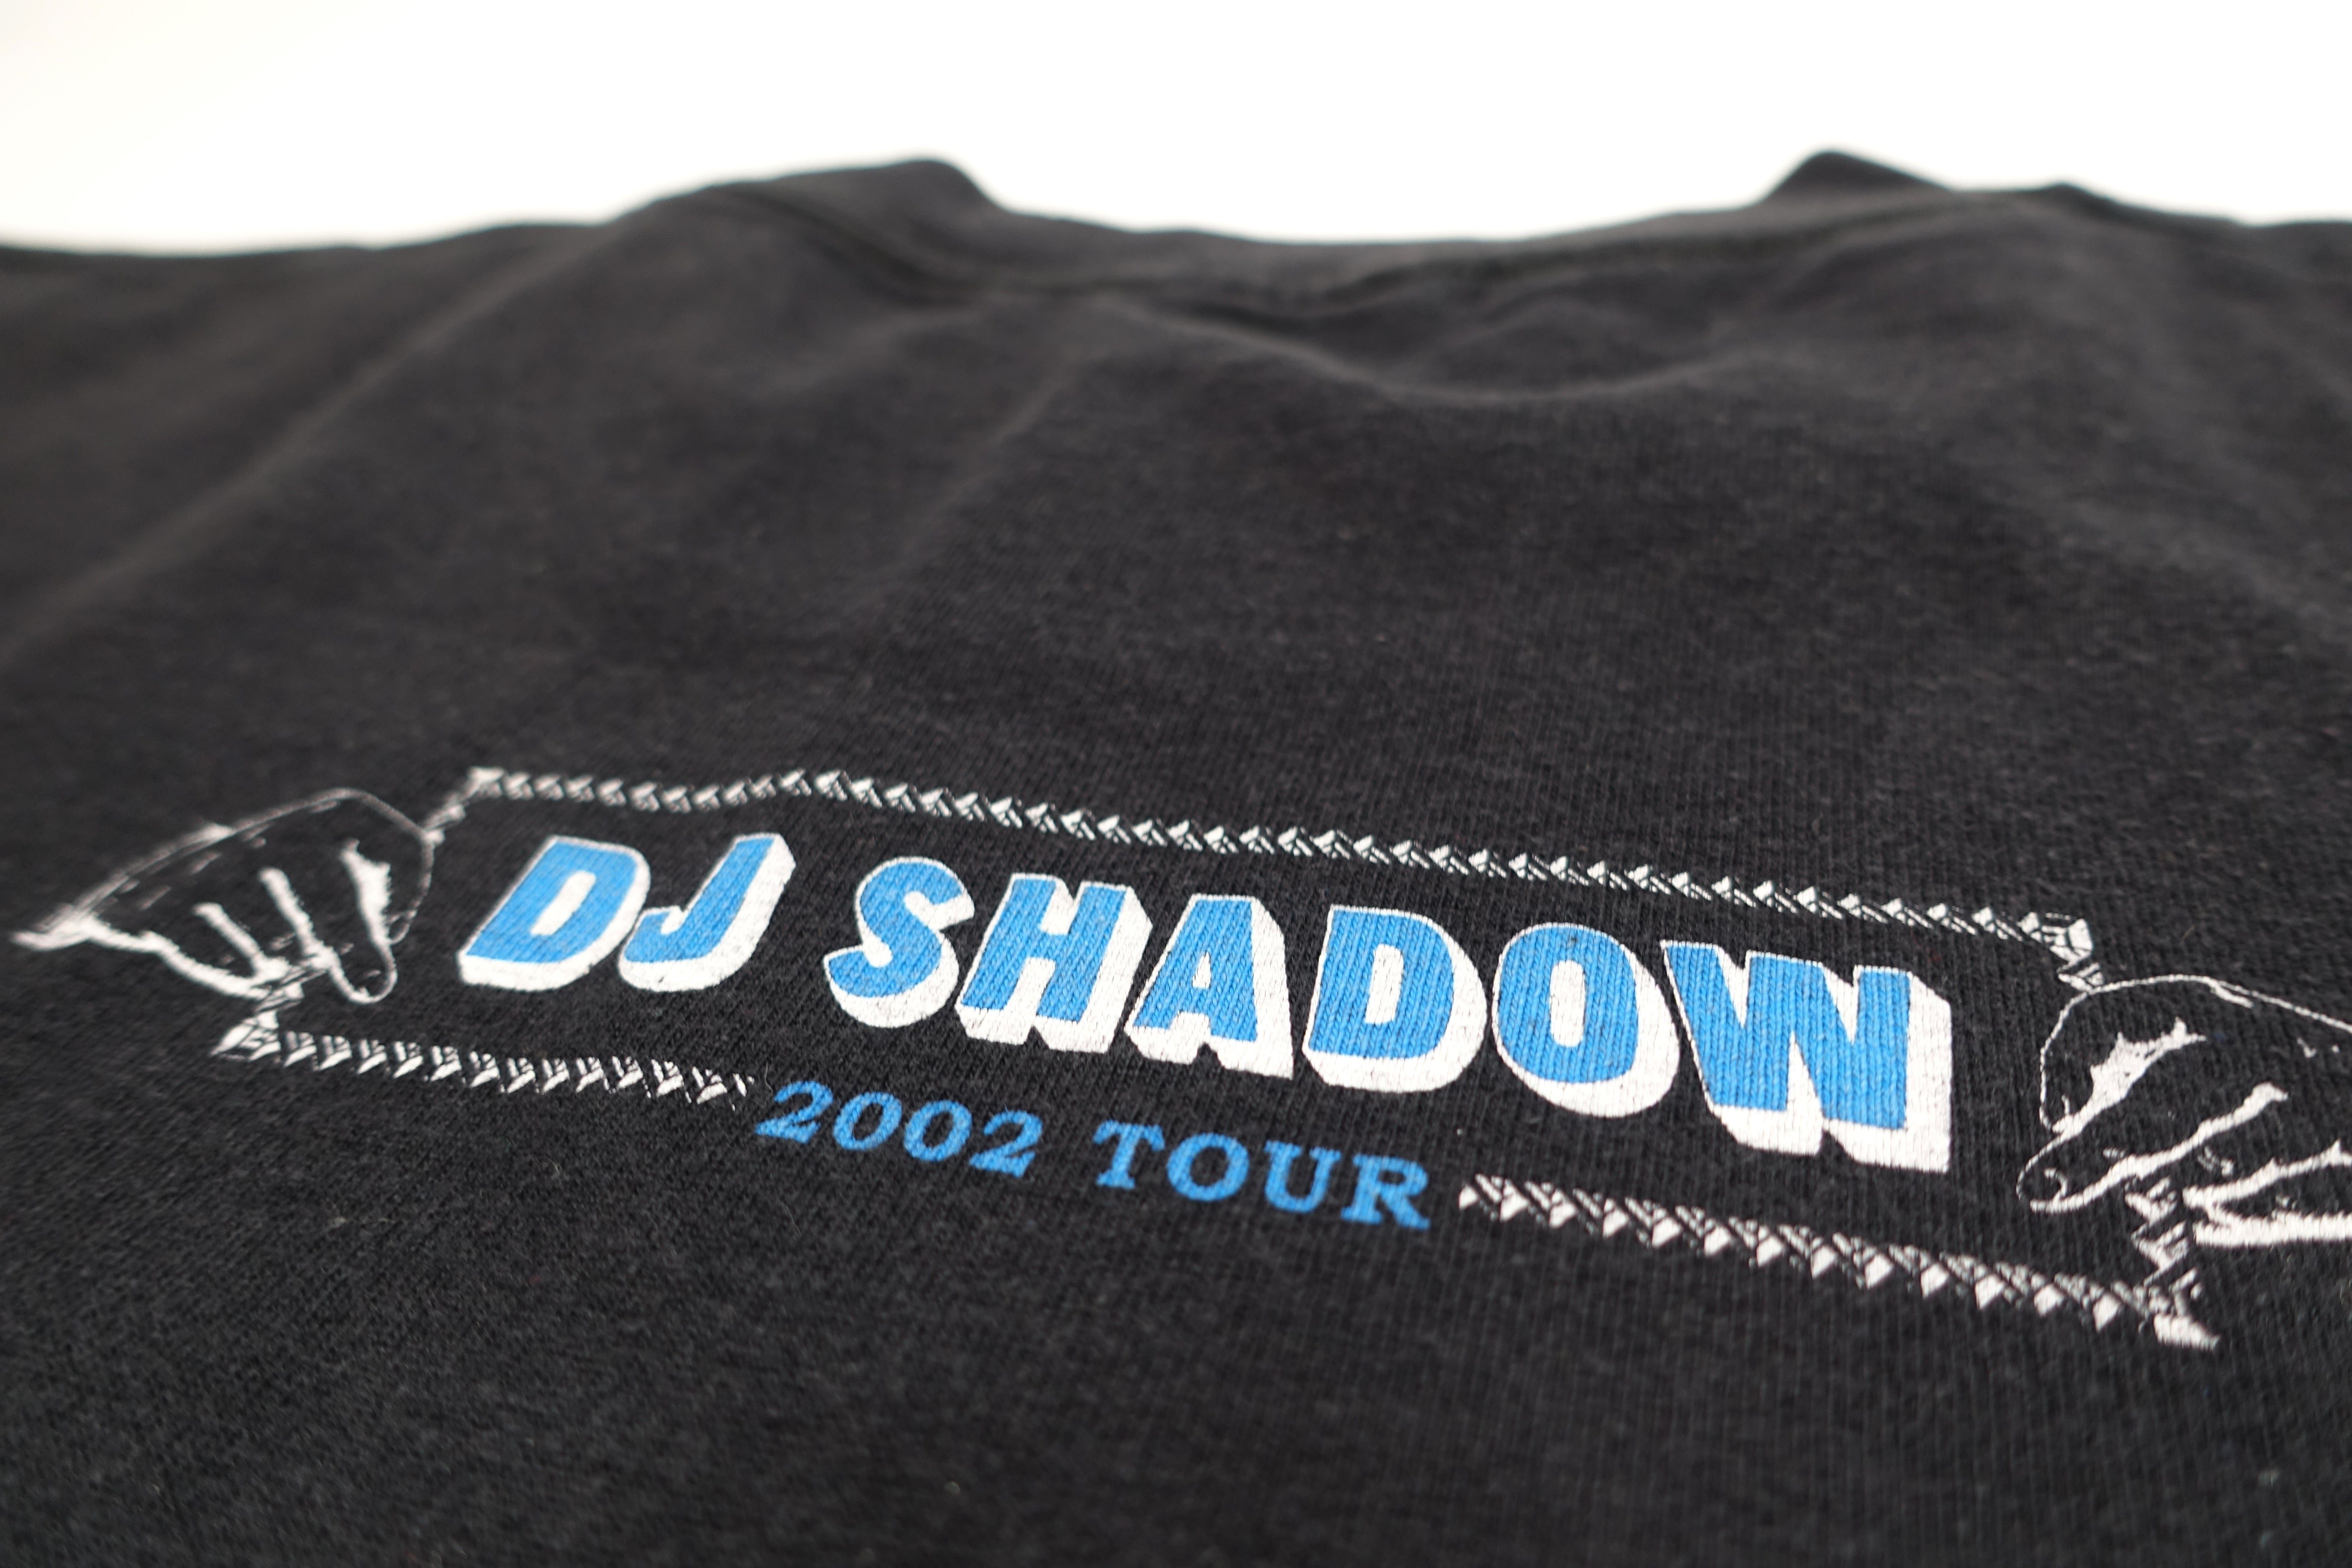 DJ Shadow - Everything Went Wrong 2002 Private Press Tour Shirt Size Large